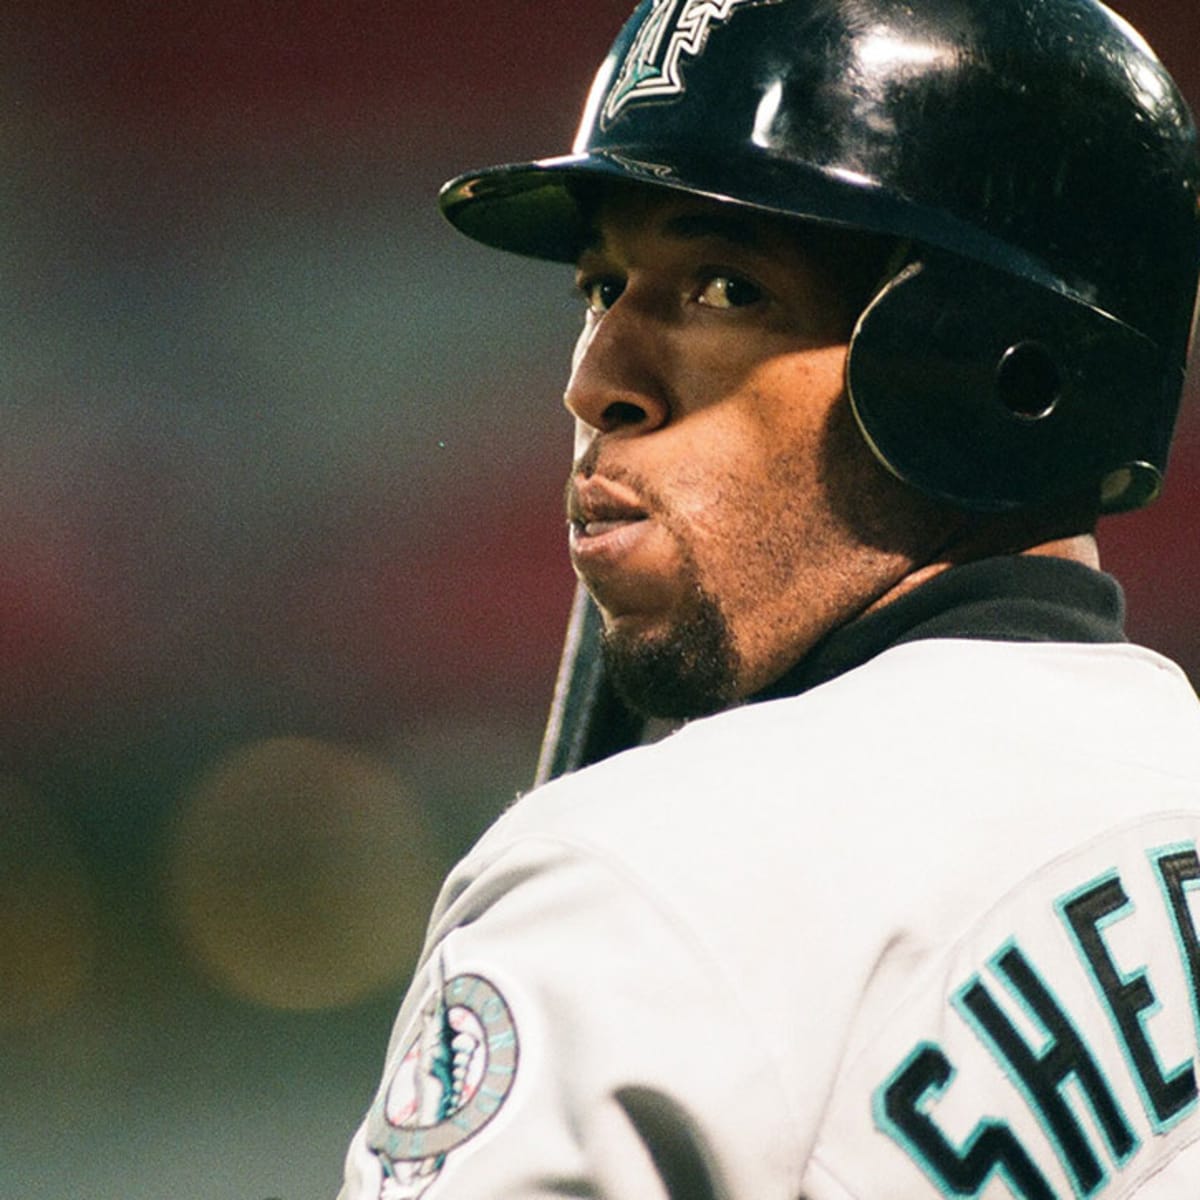 Gary Sheffield likely won't make the Hall of Fame - Sports Illustrated